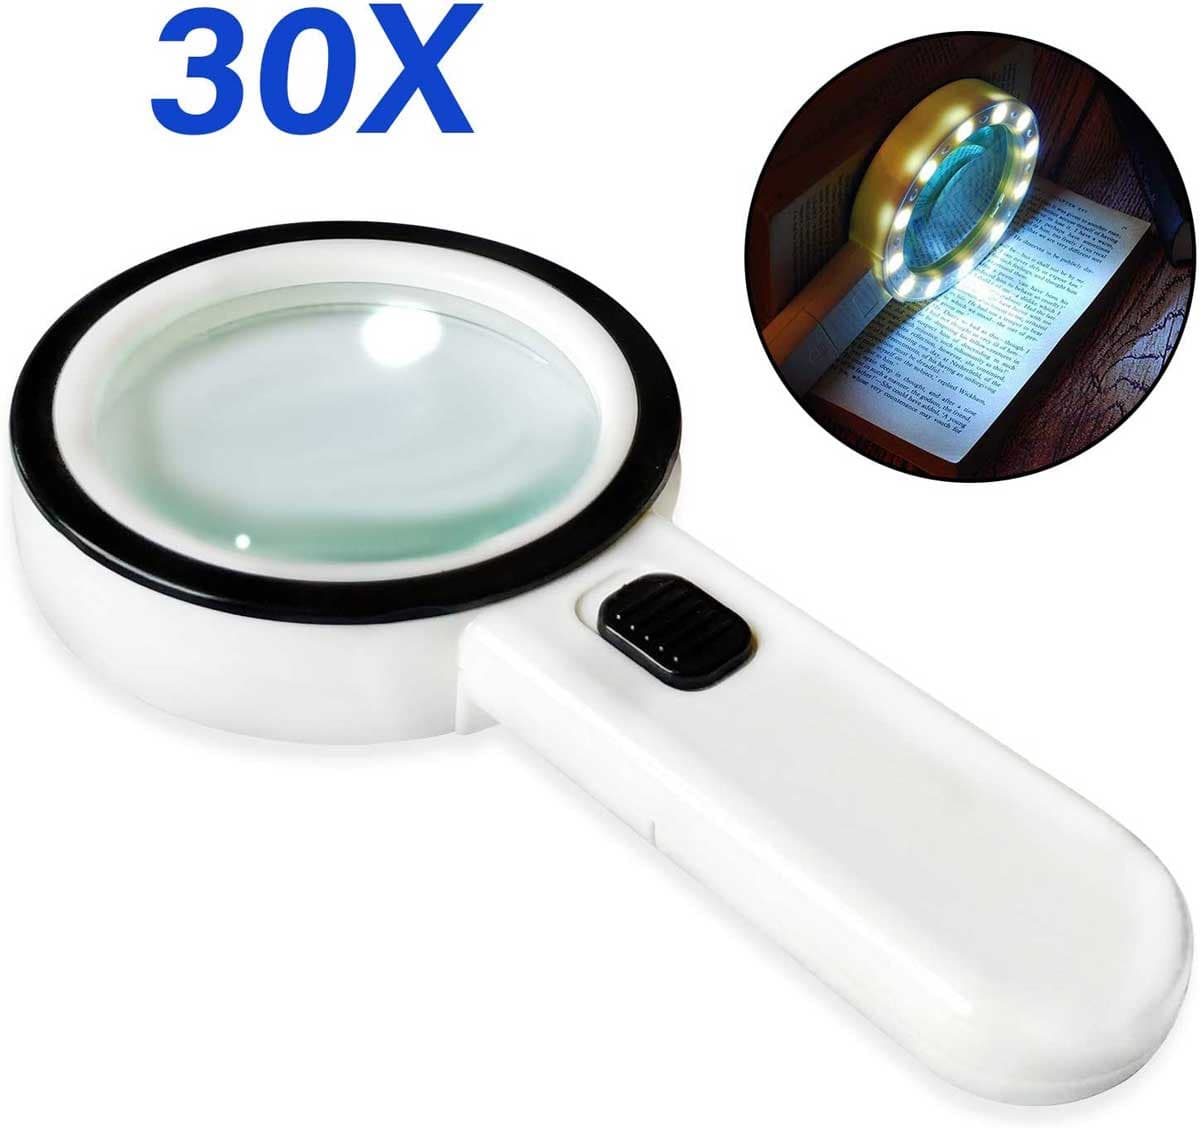 30X Portable Magnifying Glass with LED Light